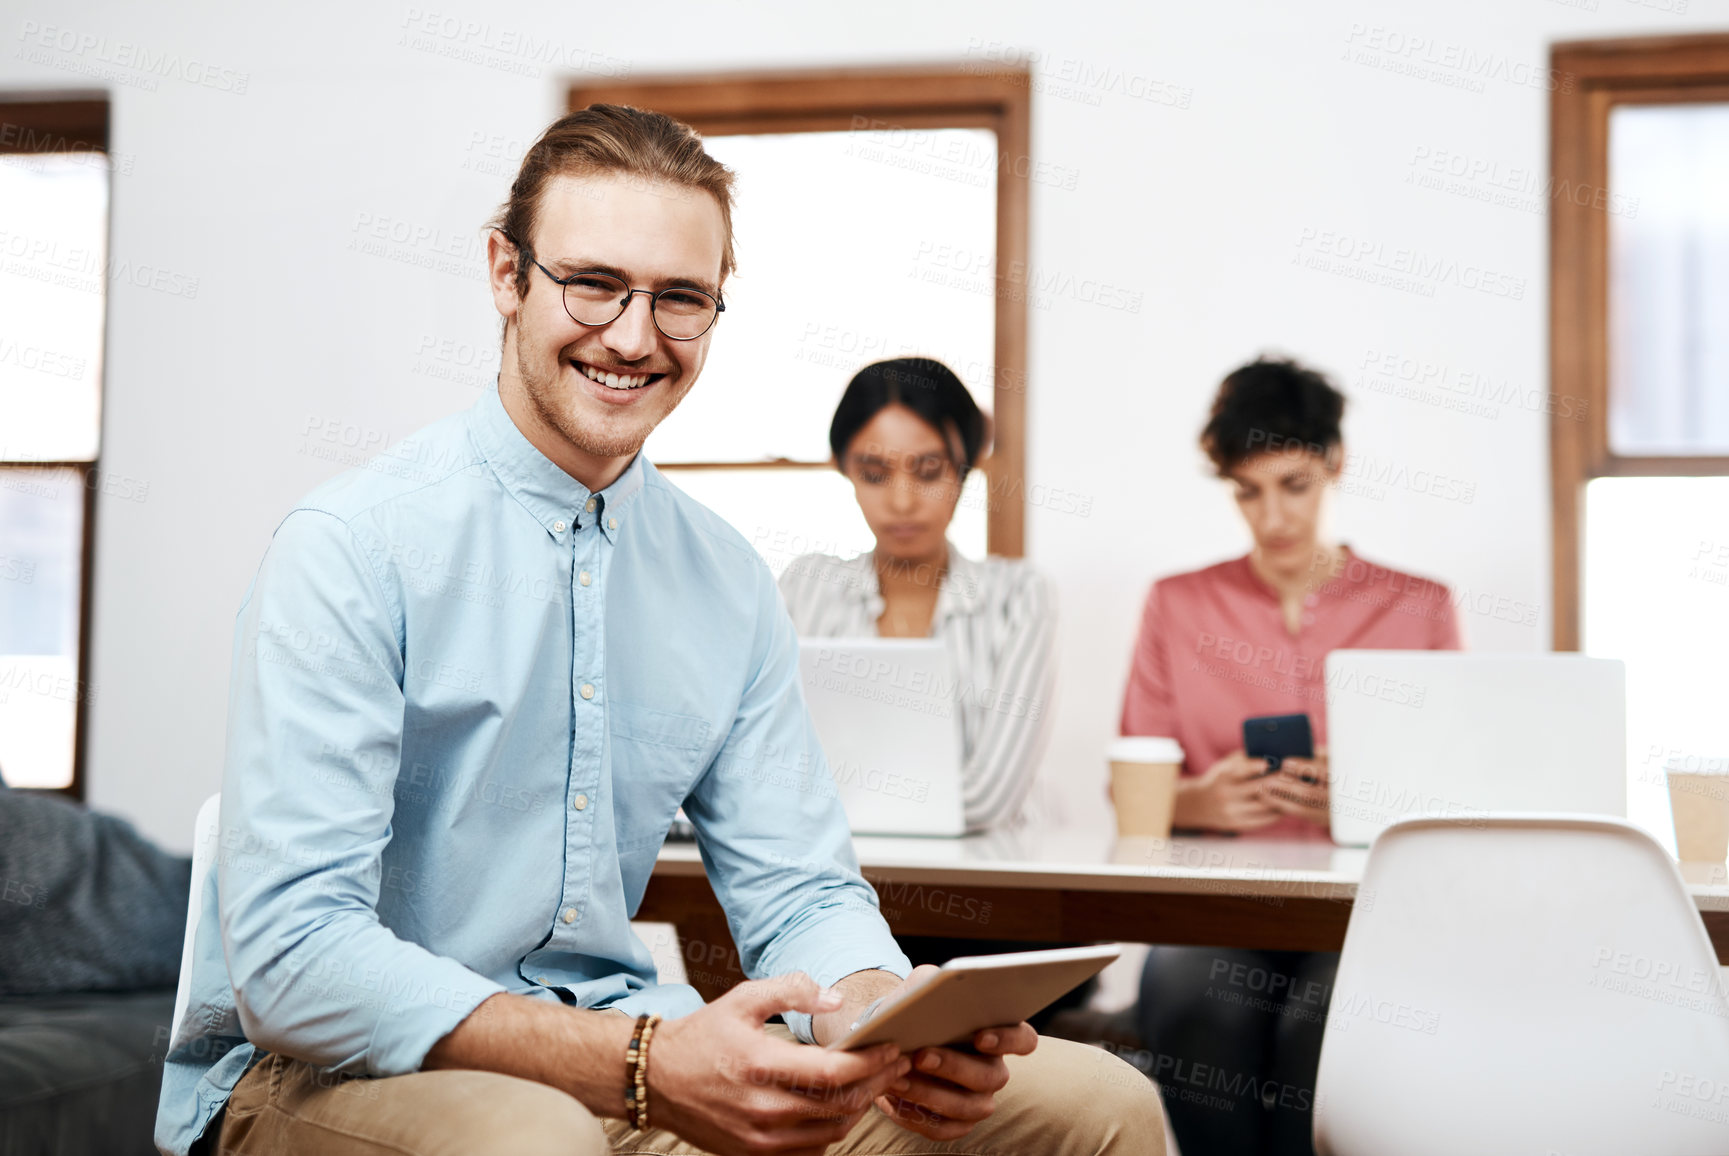 Buy stock photo Cropped portrait of a handsome young businessman sitting and using a tablet while his colleagues work behind him